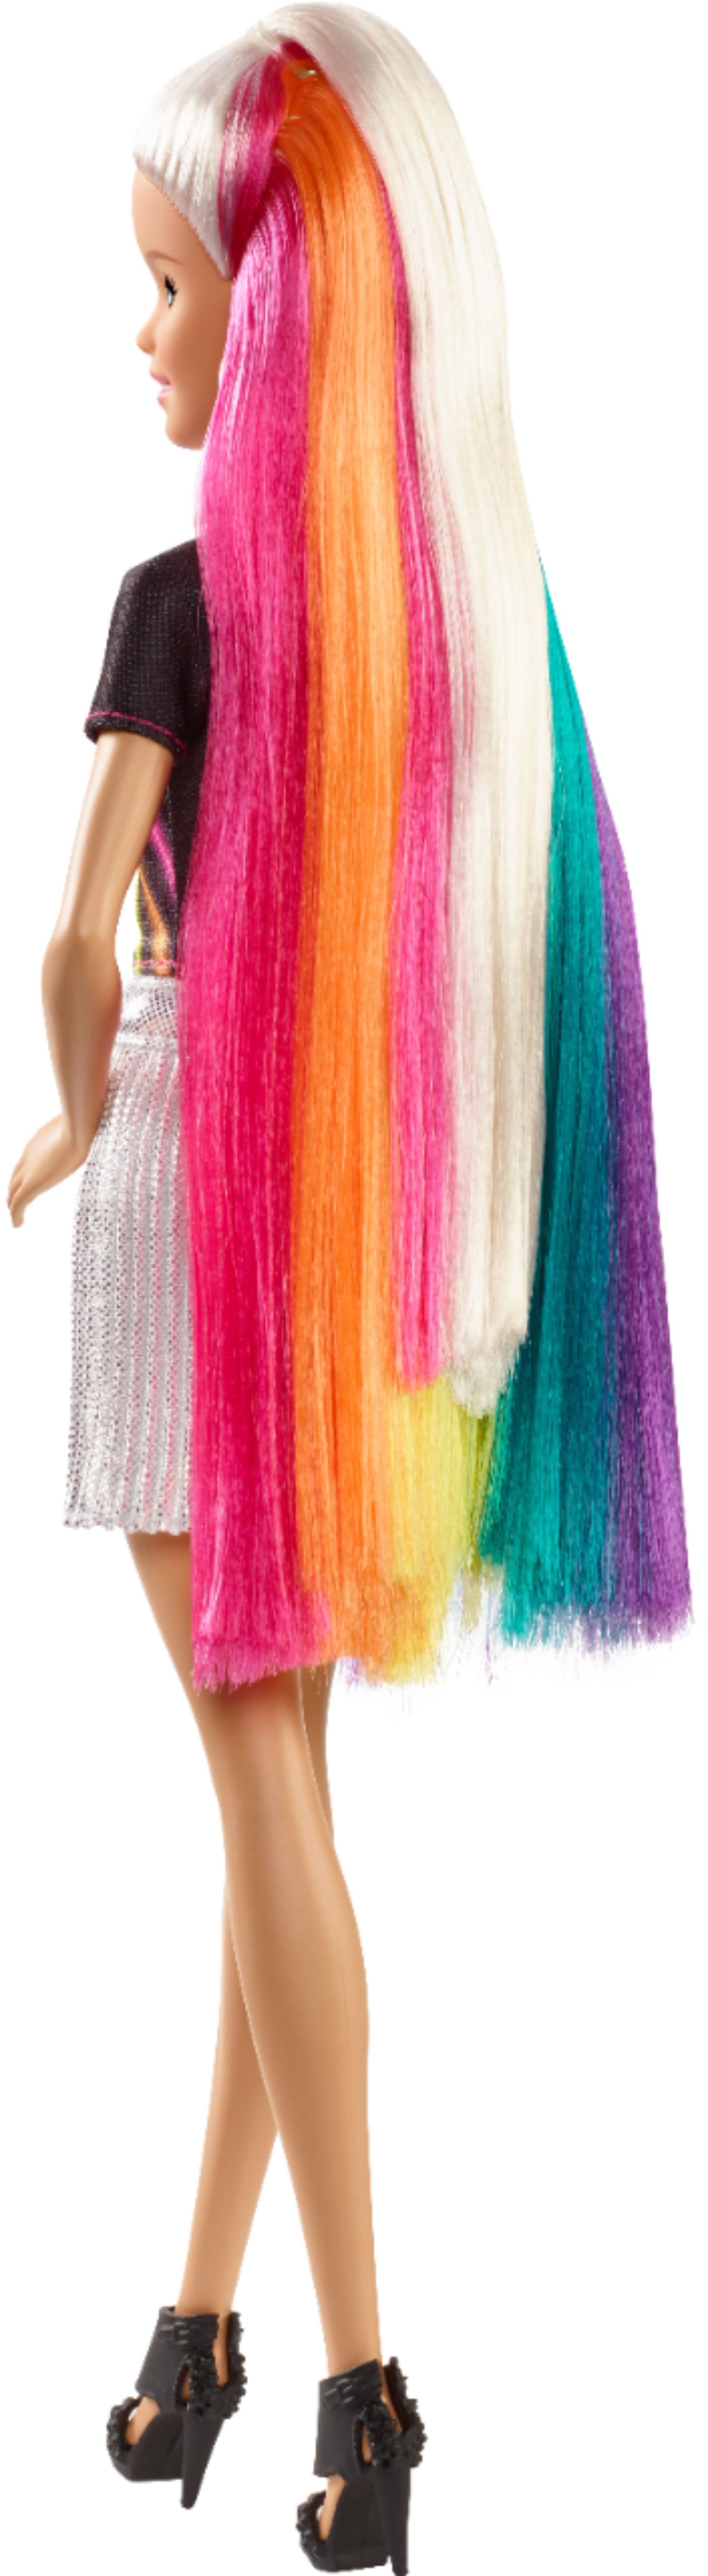 barbie with sparkly hair